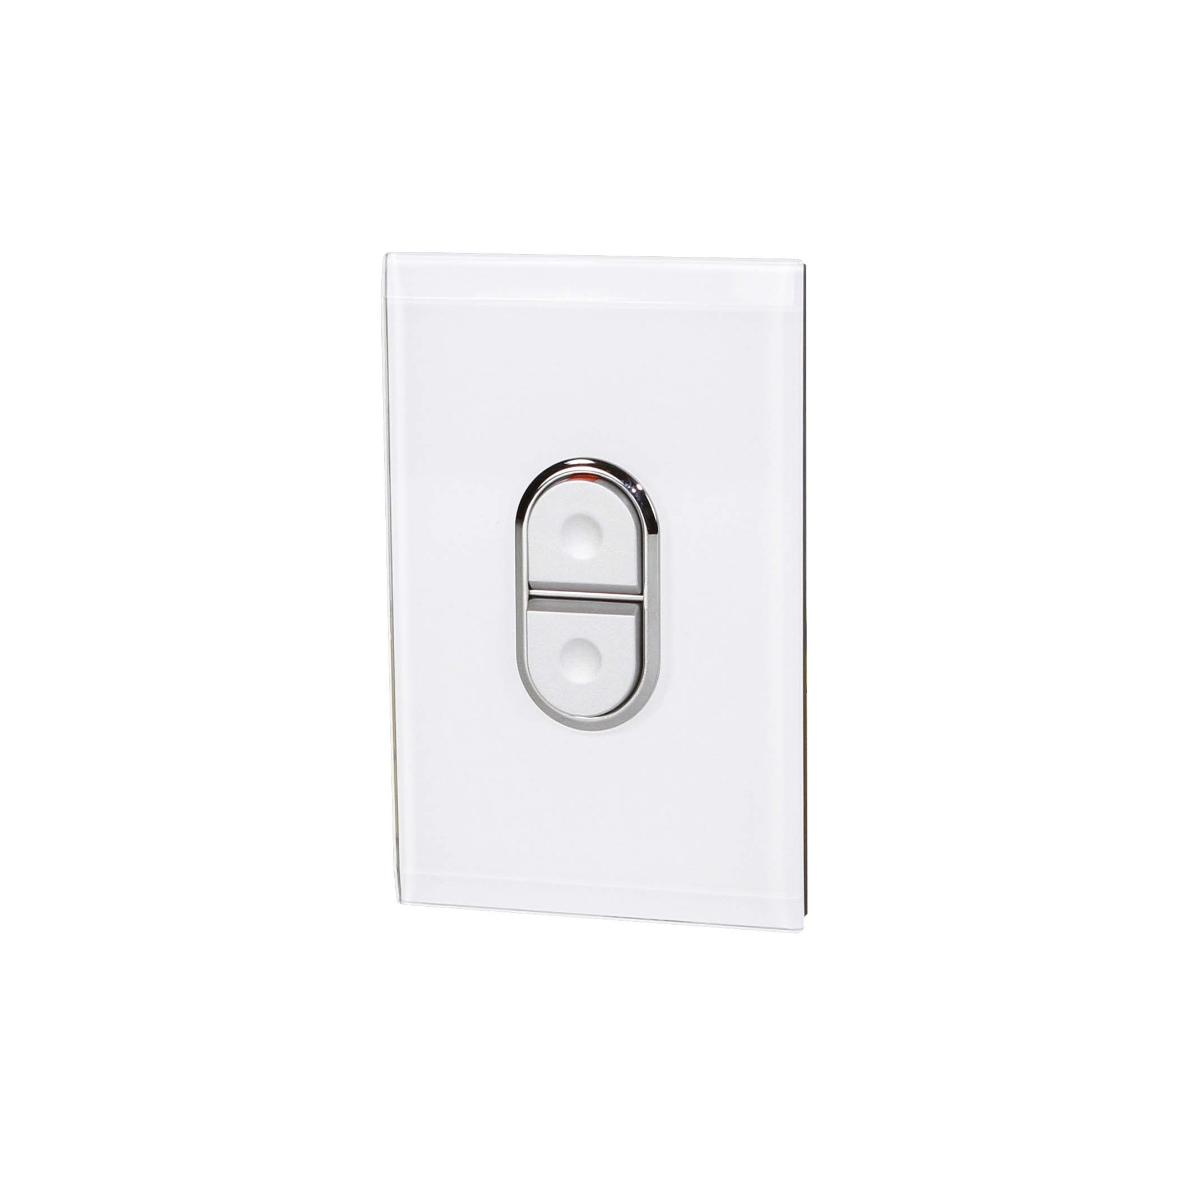 SATURN COOKER SWITCH 1G 45A S/P PURE WH